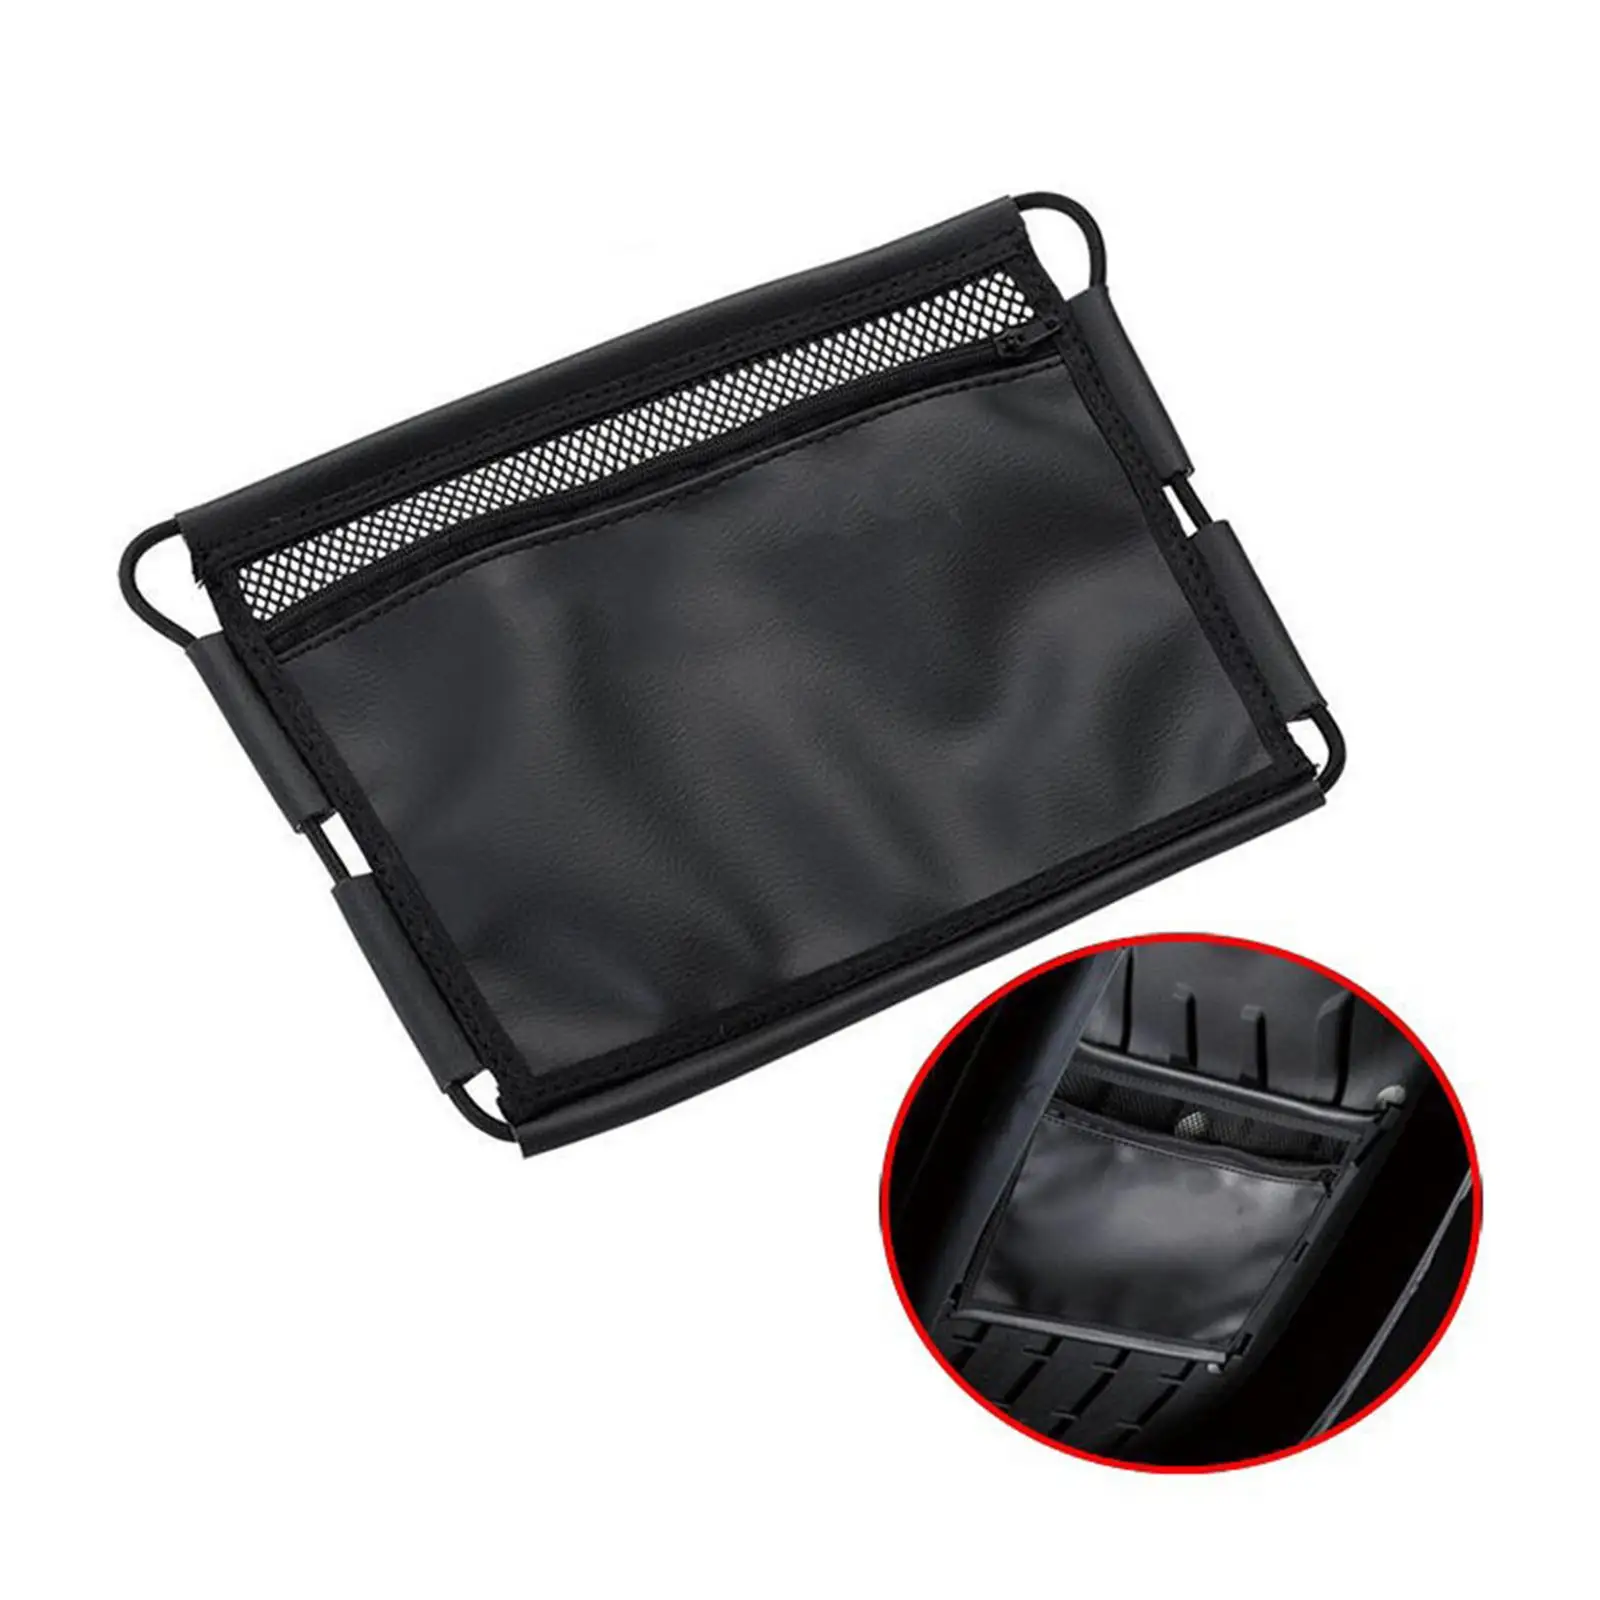 PU Leather Motorcycle Seat Bag with Mounting Kits Case Durable Accessories Tool Pouch Under Seat Storage Bag for Motorcycle